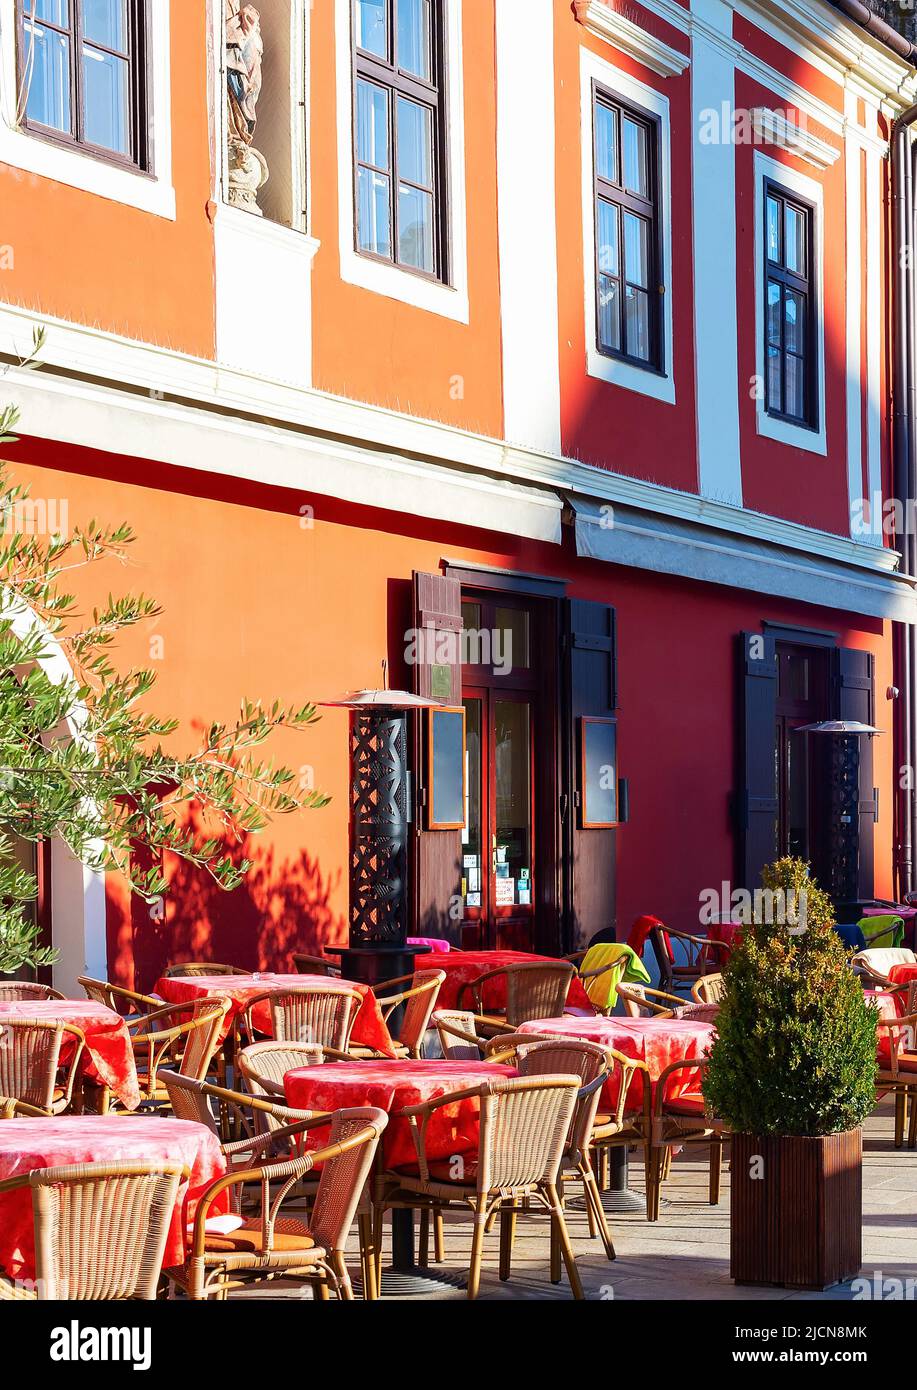 Street cafe view in the morning sunlight, Gyor, Hungary Stock Photo